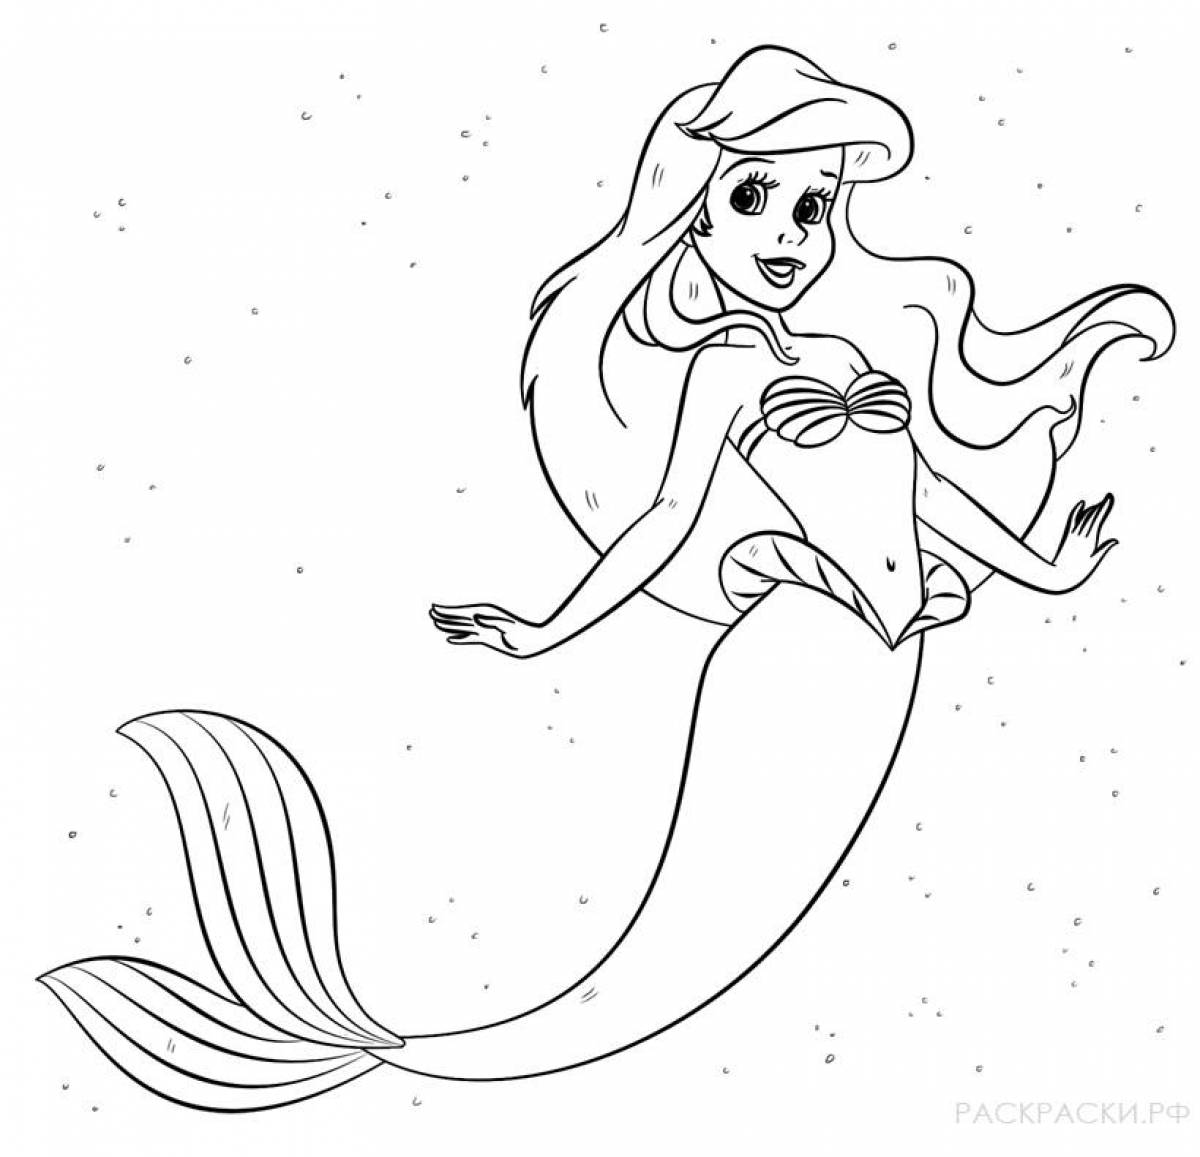 Playful little mermaid coloring book for kids